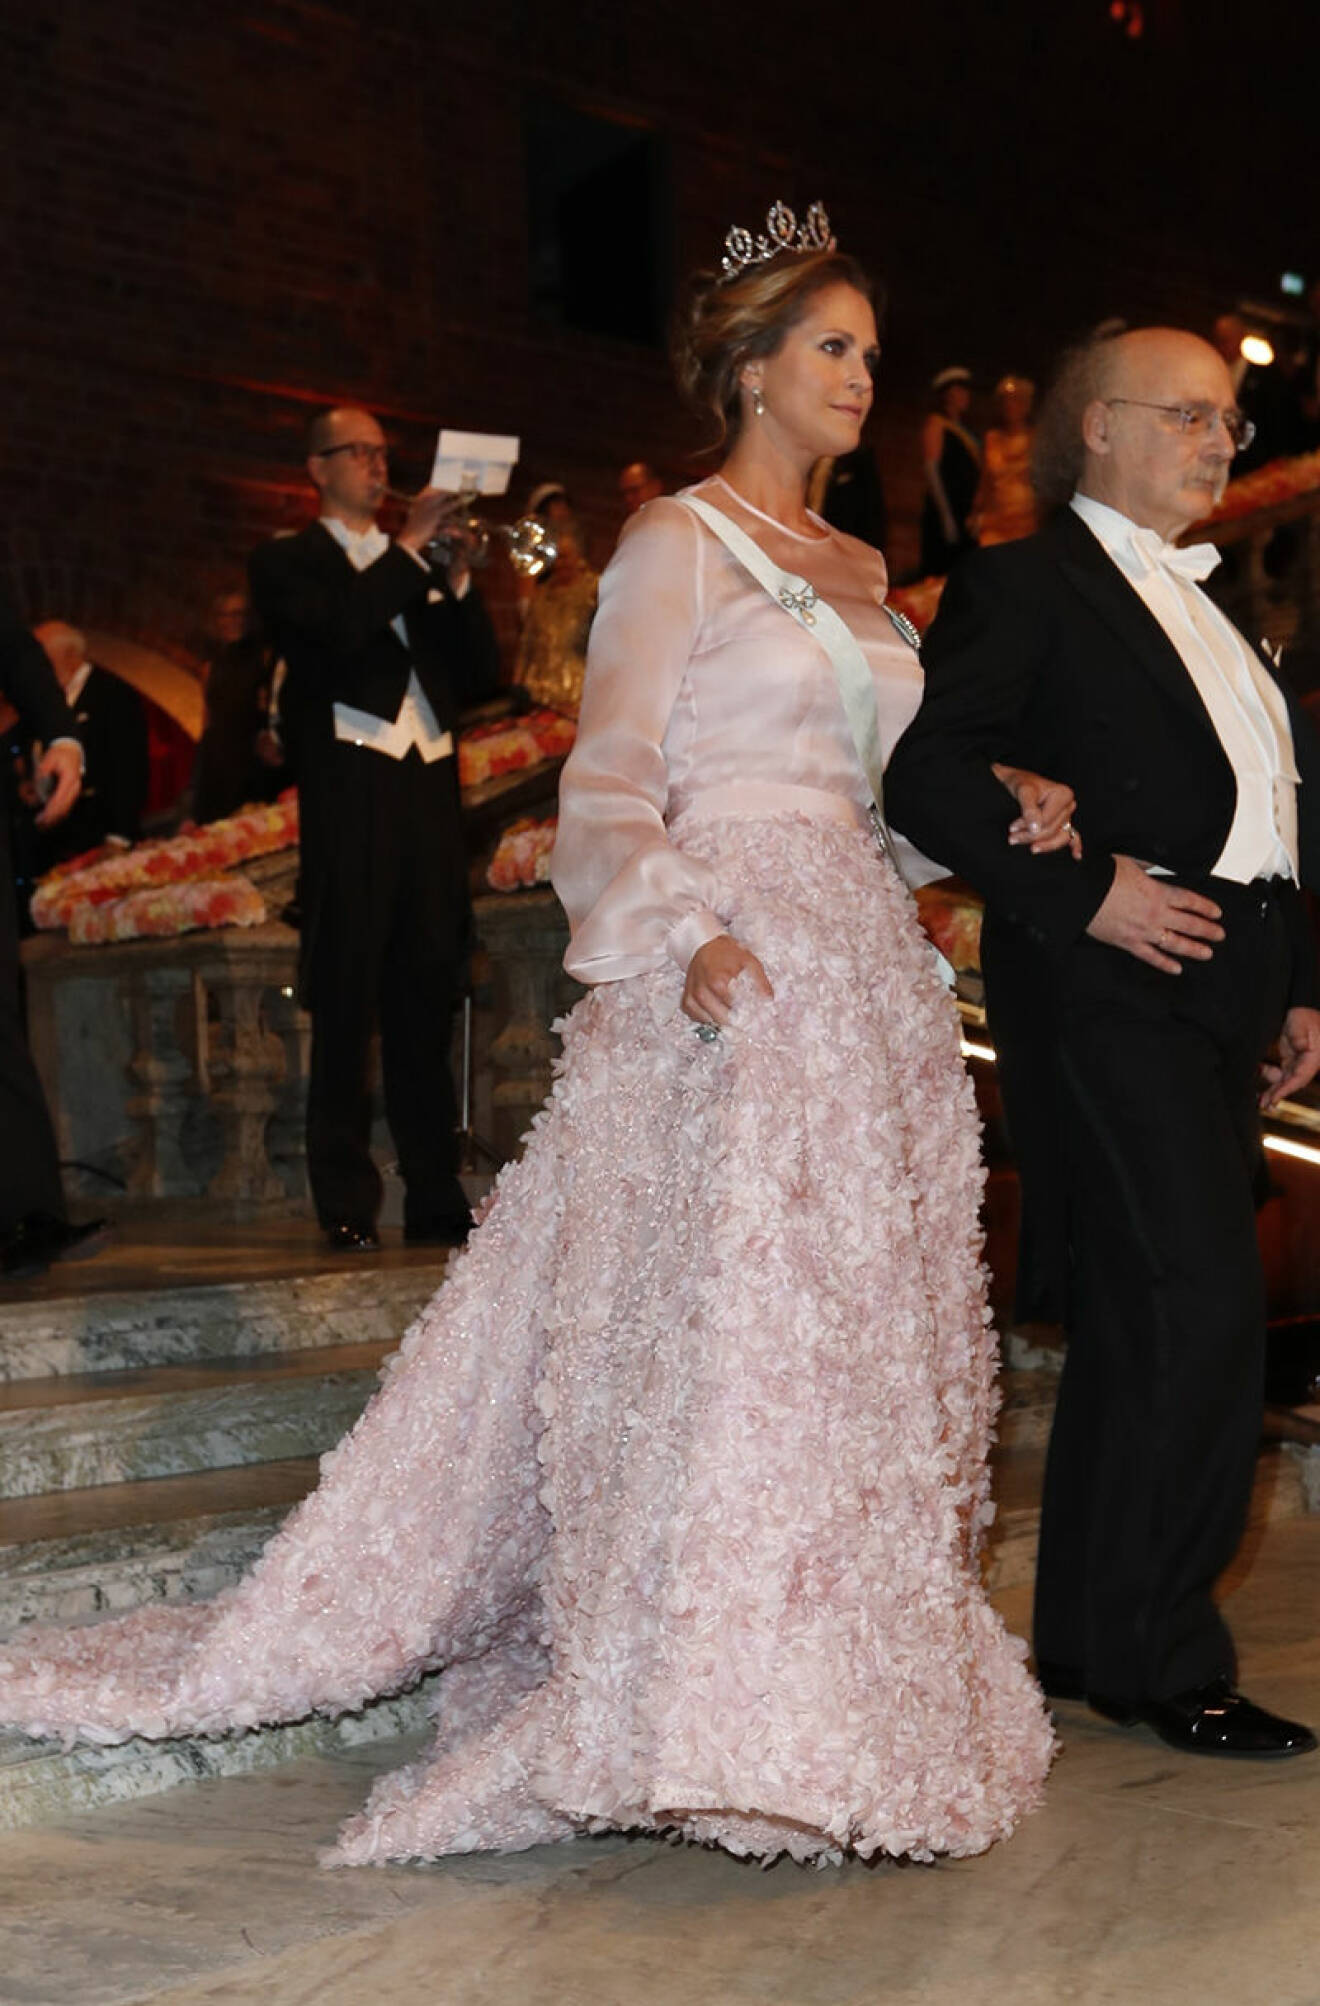 6849519 STOCKHOLM 2016-12-10. The Nobel Prize 2016. The Nobel Banquet held in the Blue Hall of the Stockholm City Hall. Picture shows: Princess Madeleine of Sweden. COPYRIGHT STELLA PICTURES